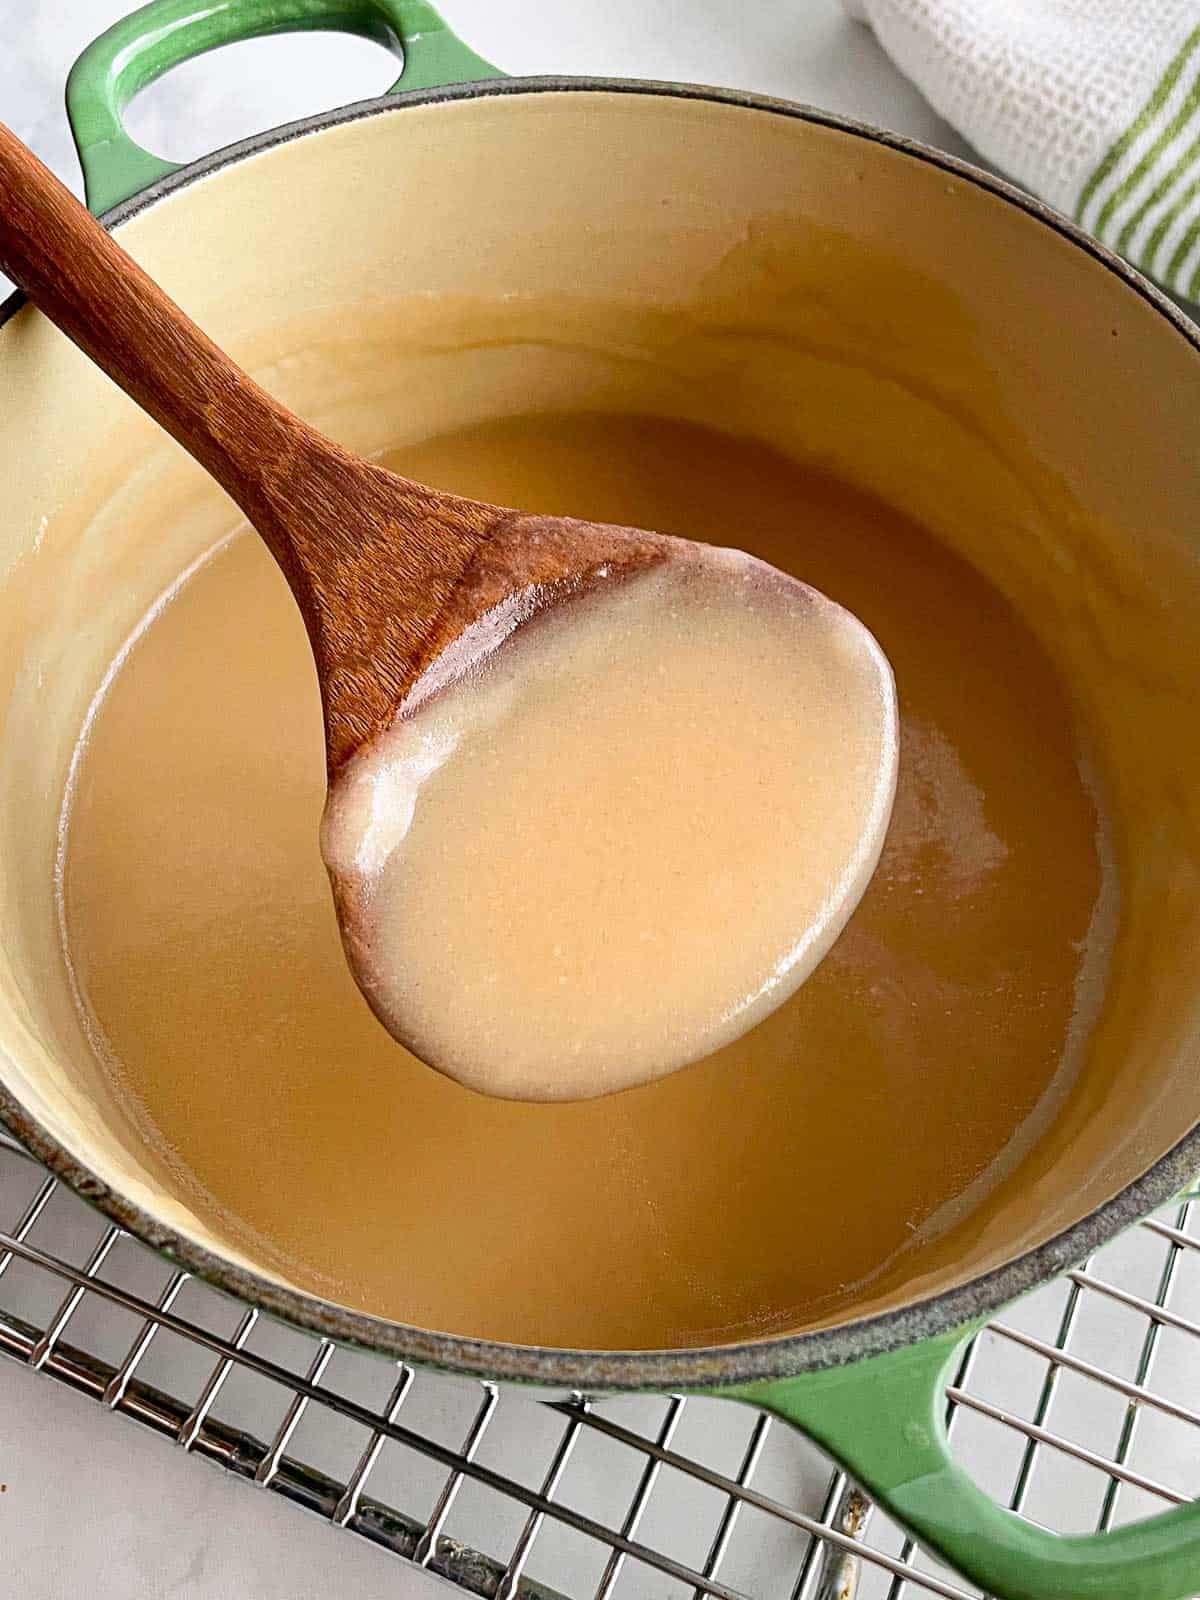 Homemade gluten-free gravy in a pan. A wooden spoon holds a spoonful of gravy above the pan.